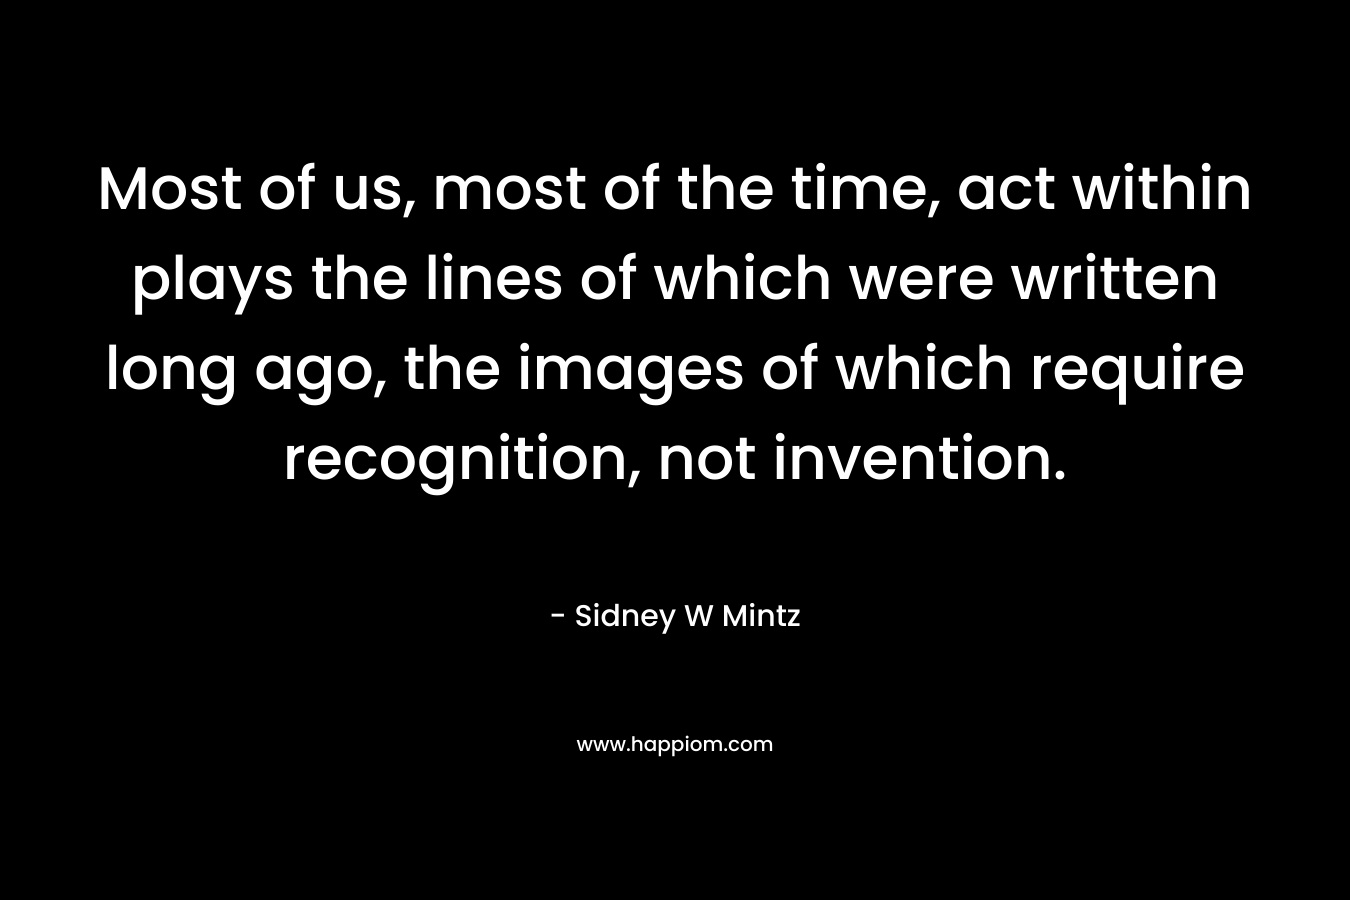 Most of us, most of the time, act within plays the lines of which were written long ago, the images of which require recognition, not invention.